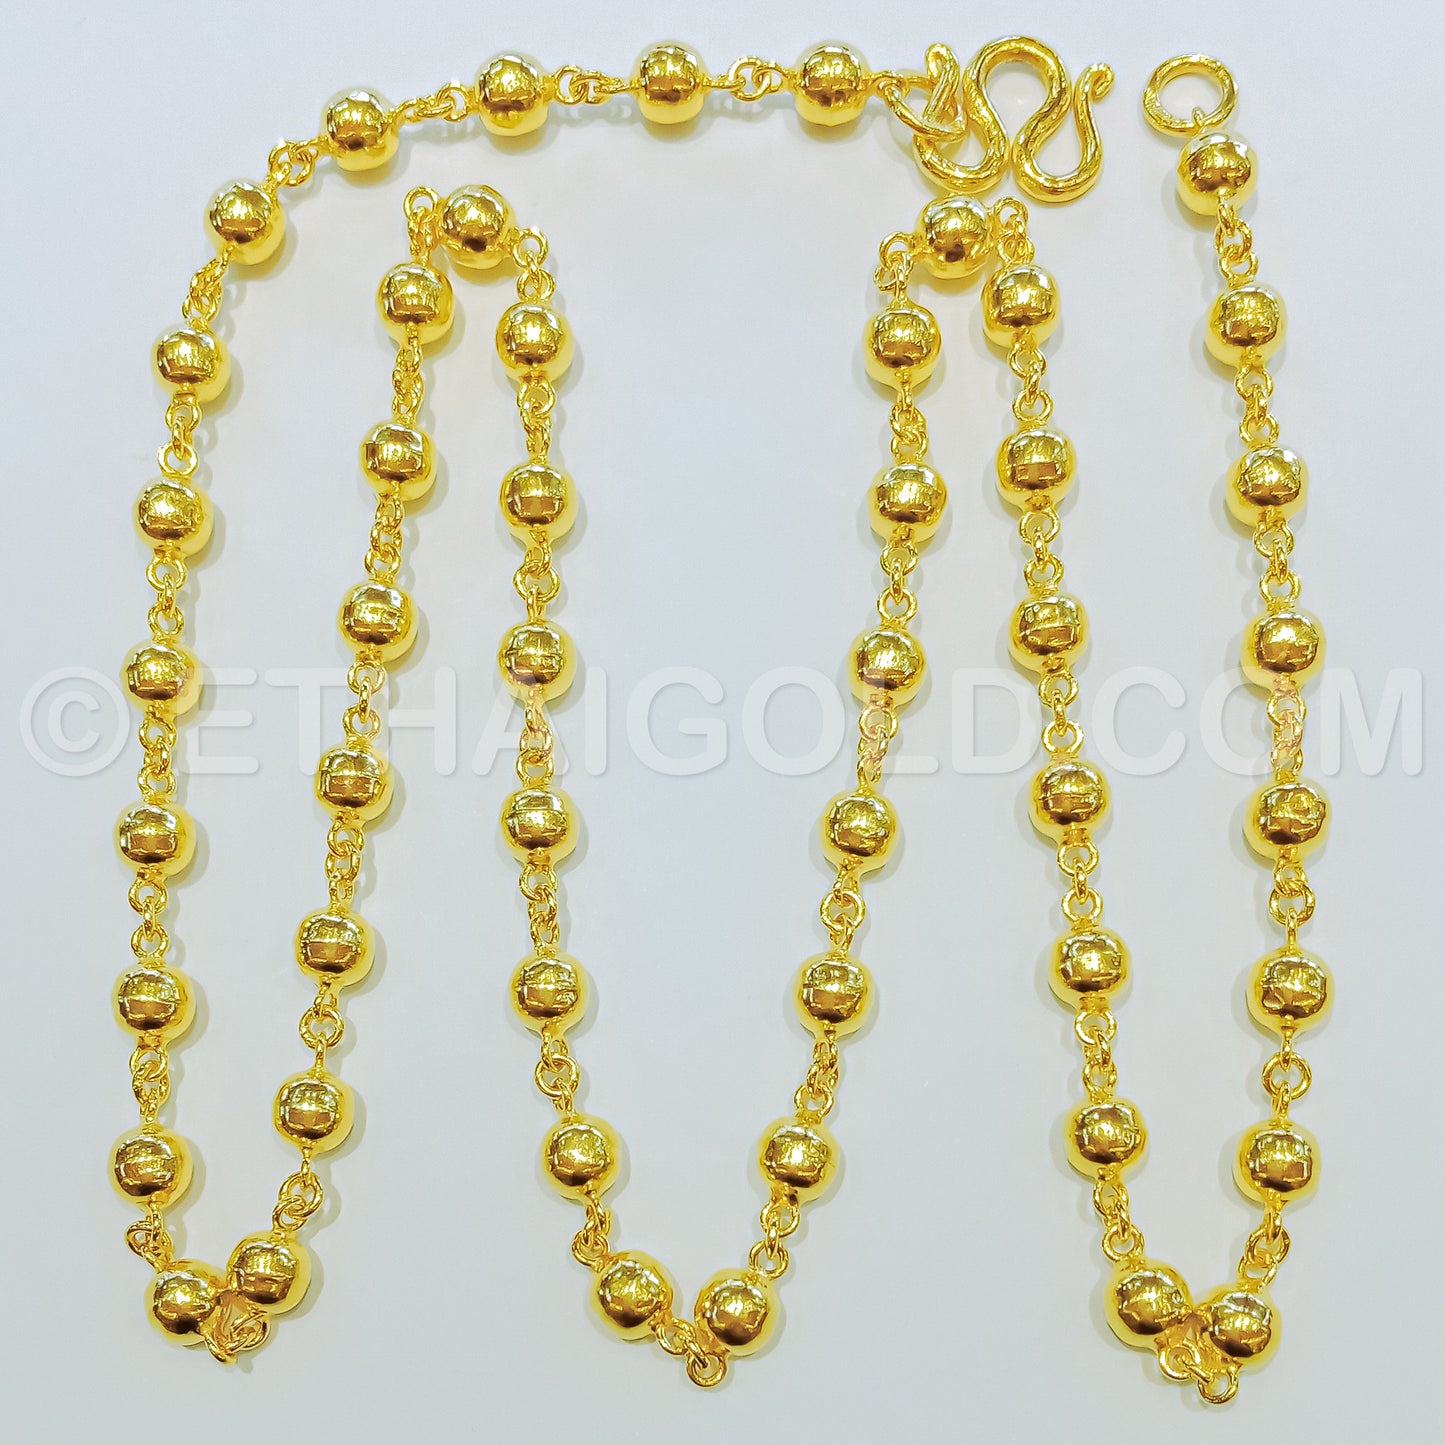 5 BAHT POLISHED HOLLOW ROSARY BEAD CHAIN NECKLACE IN 23K GOLD (ID: N3505B)